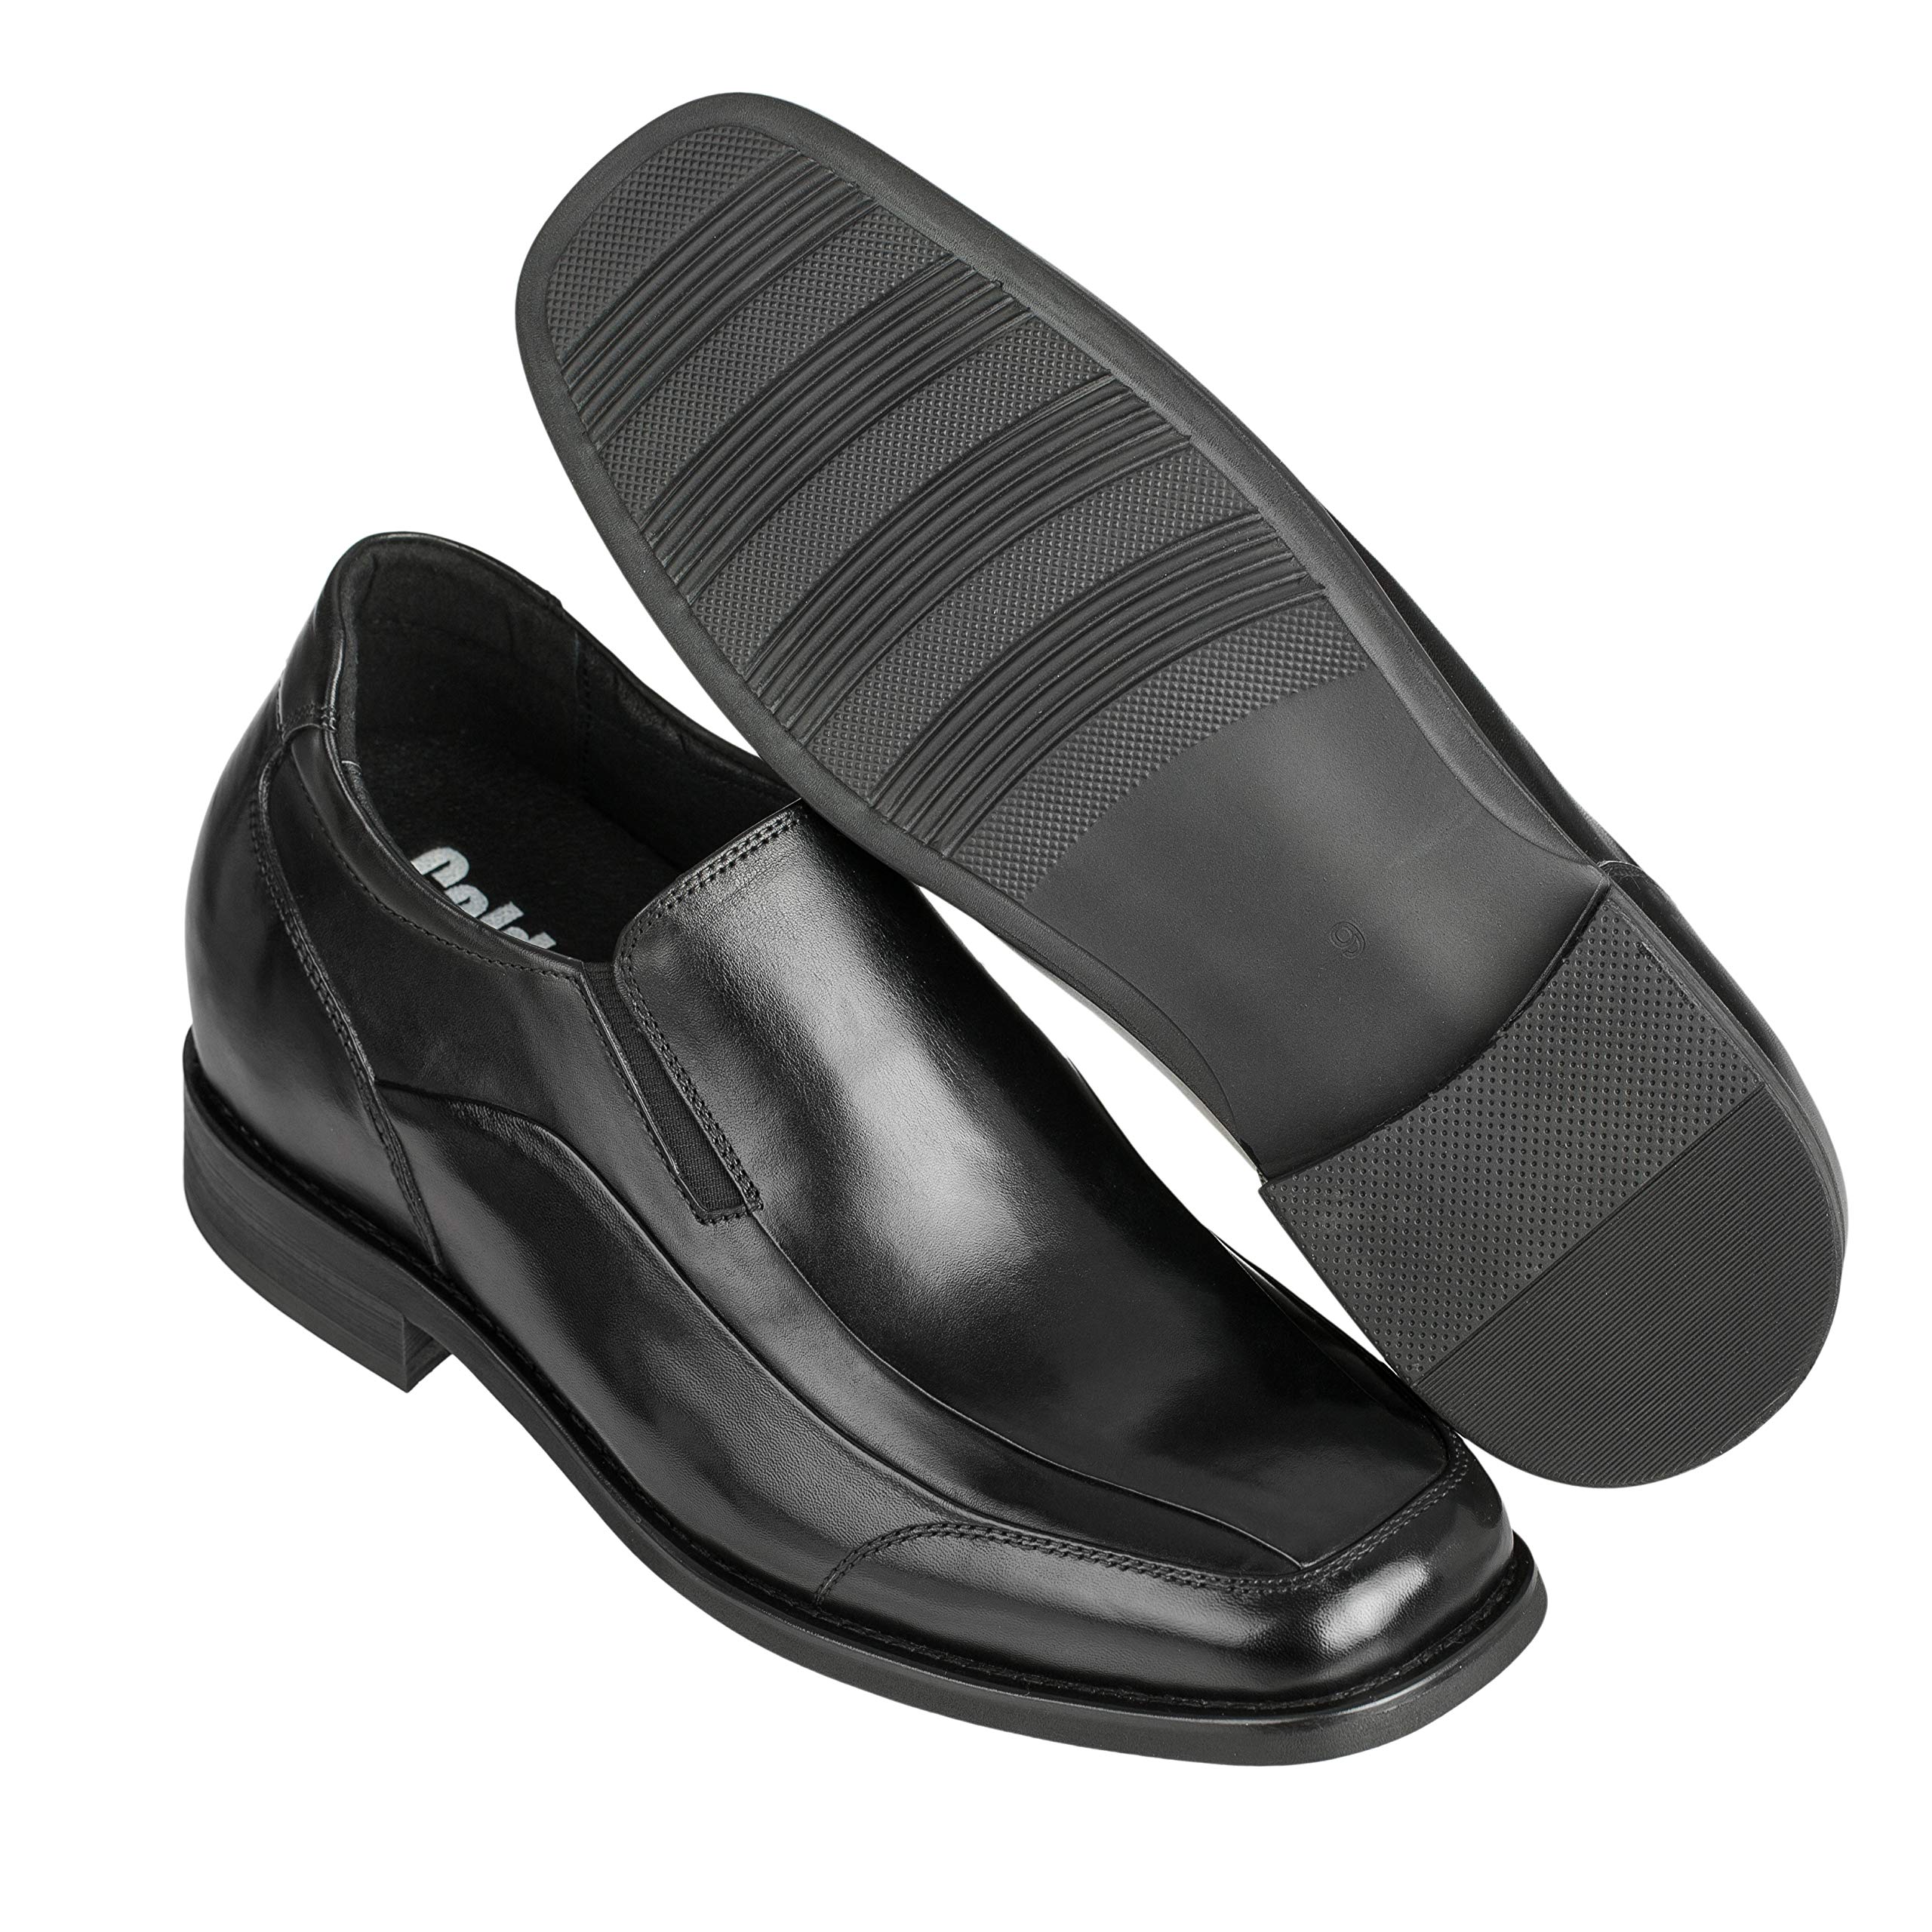 Calden Men's Invisible Height Increasing Elevator Shoes - Black Leather Lightweight Dress Shoes - 3 Inches Taller